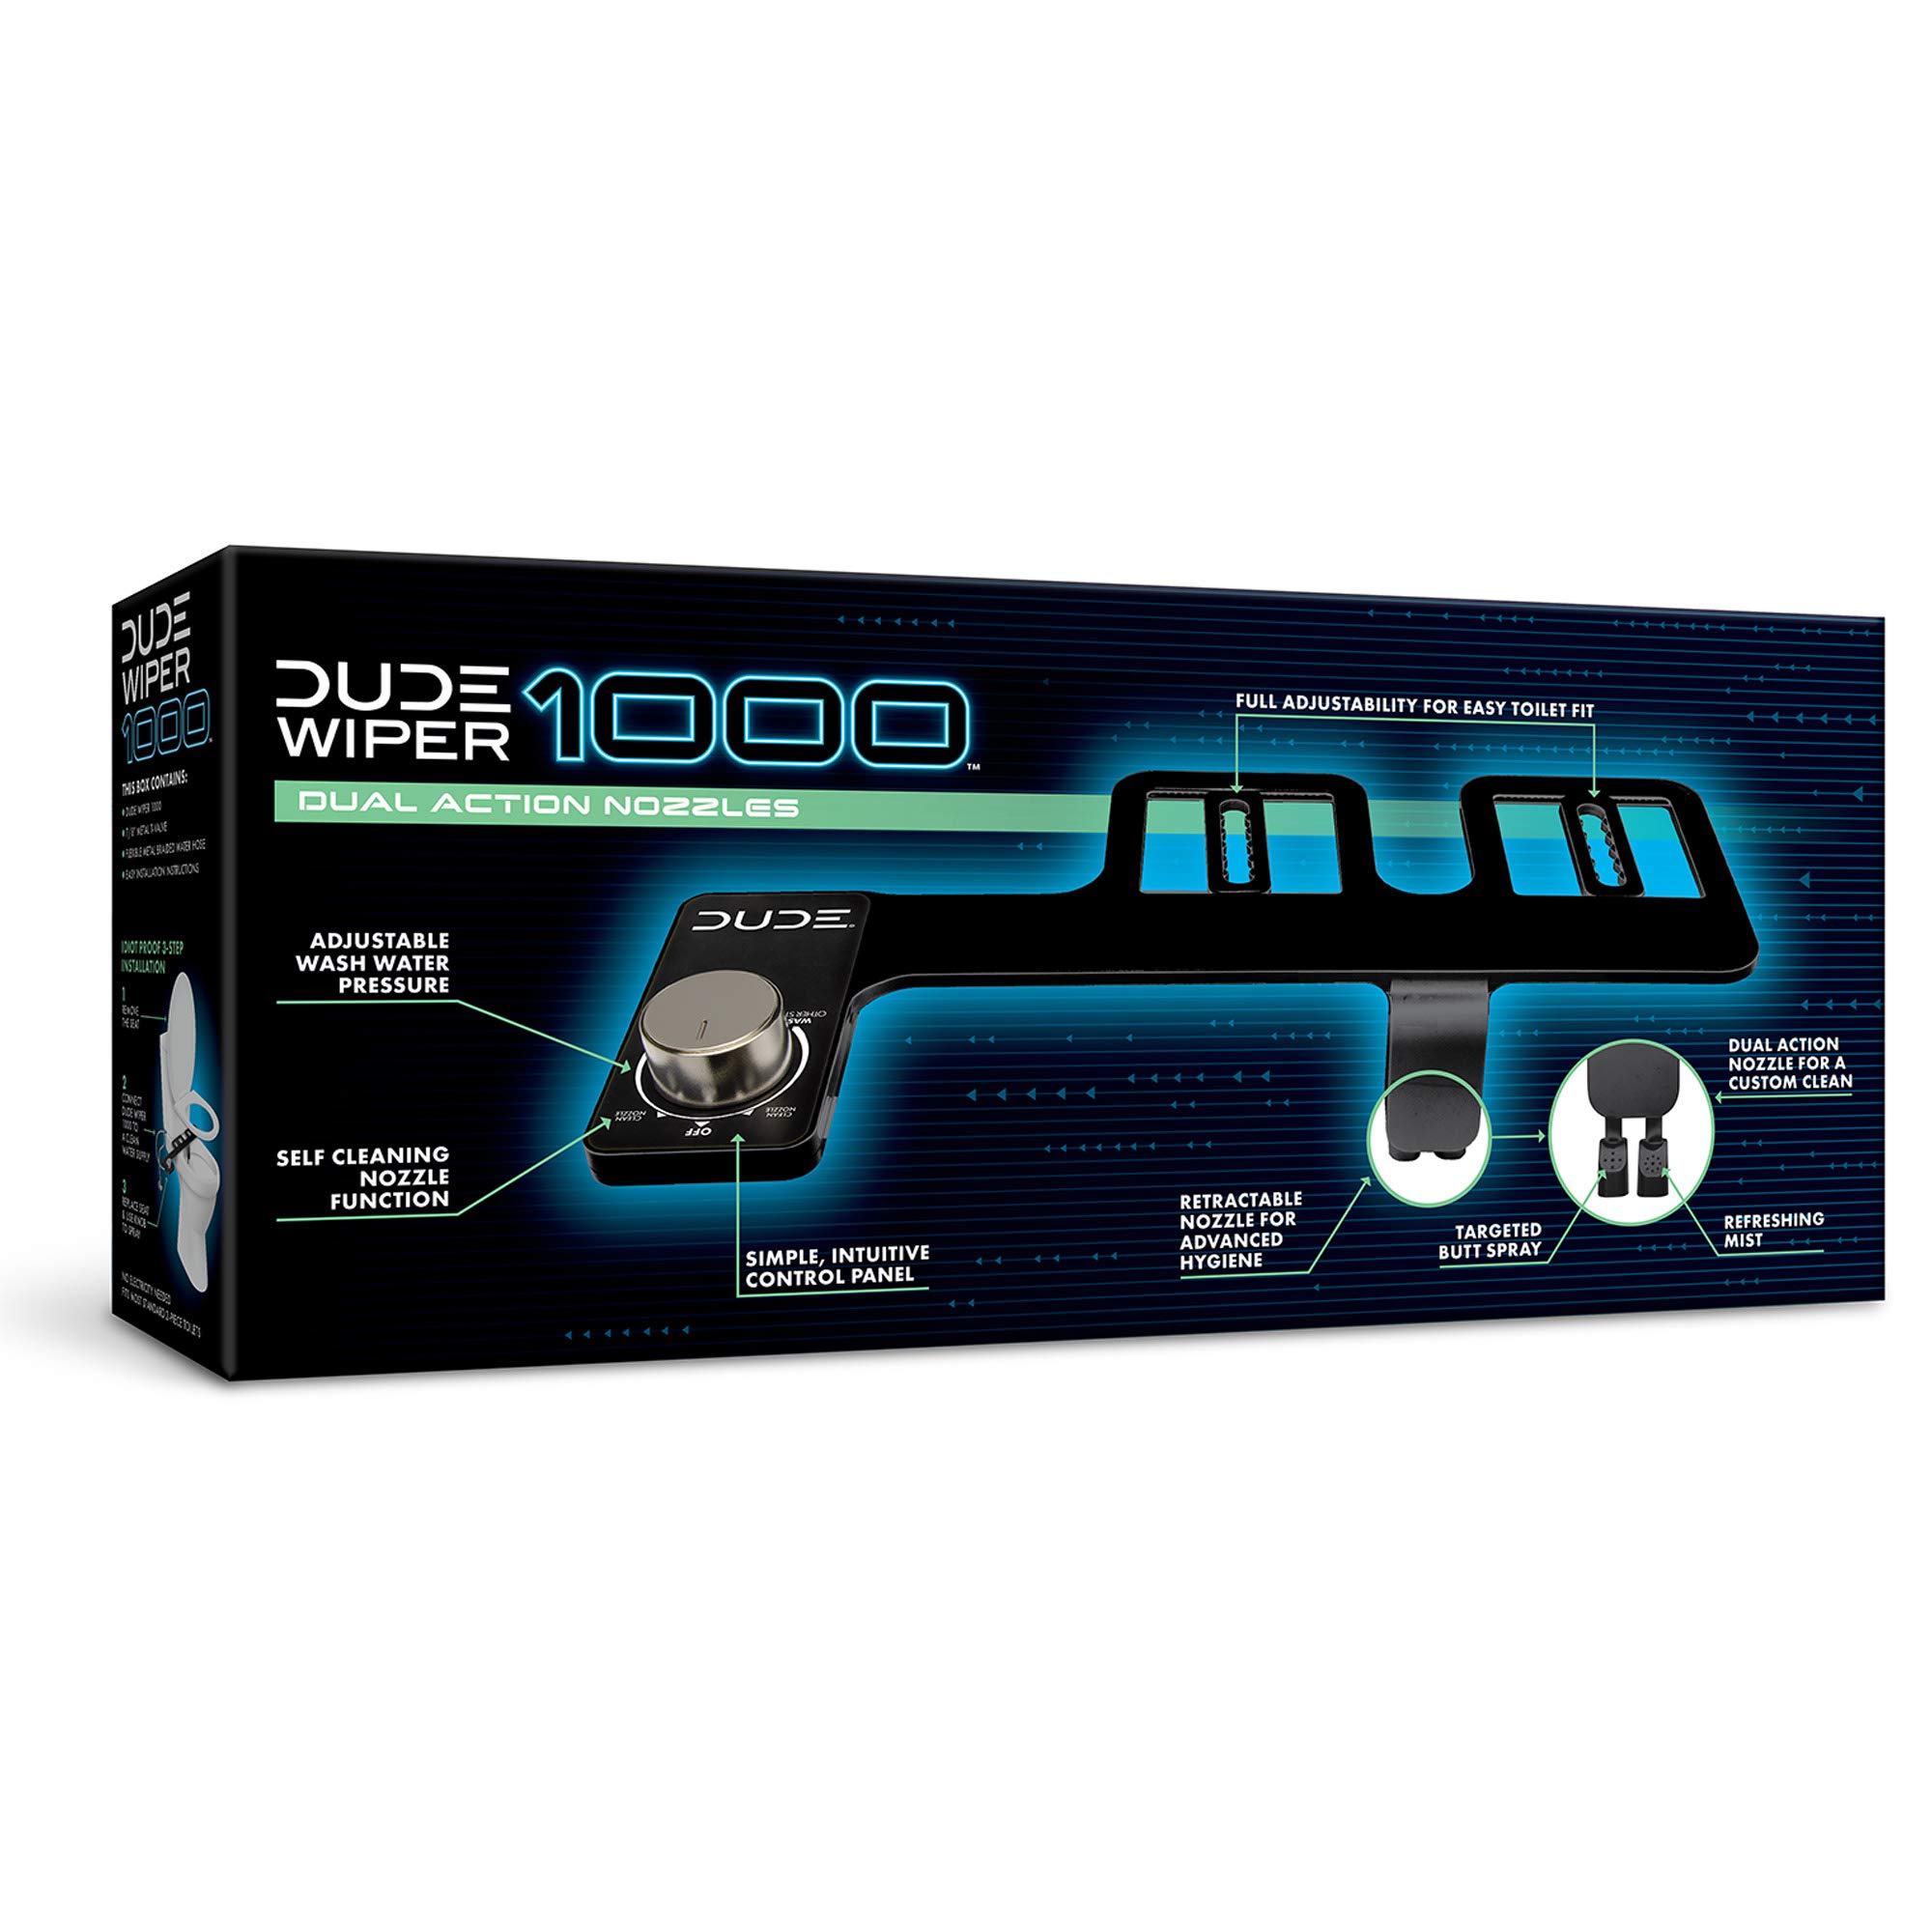 DUDE Wiper 1000 - Bidet Attachment - Black Dual-Action Nozzle and Control Panel - Easy Installation - Fits Most Standard Toilets